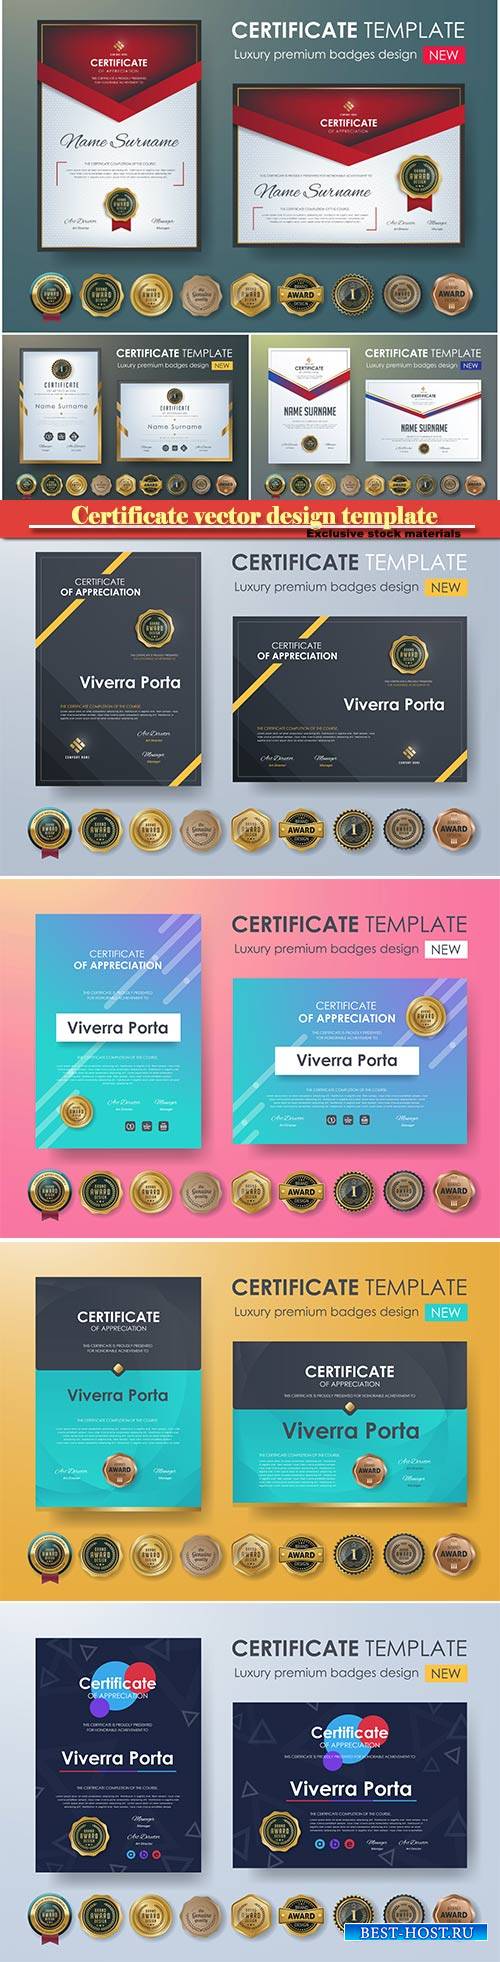 Certificate and vector diploma design template # 39